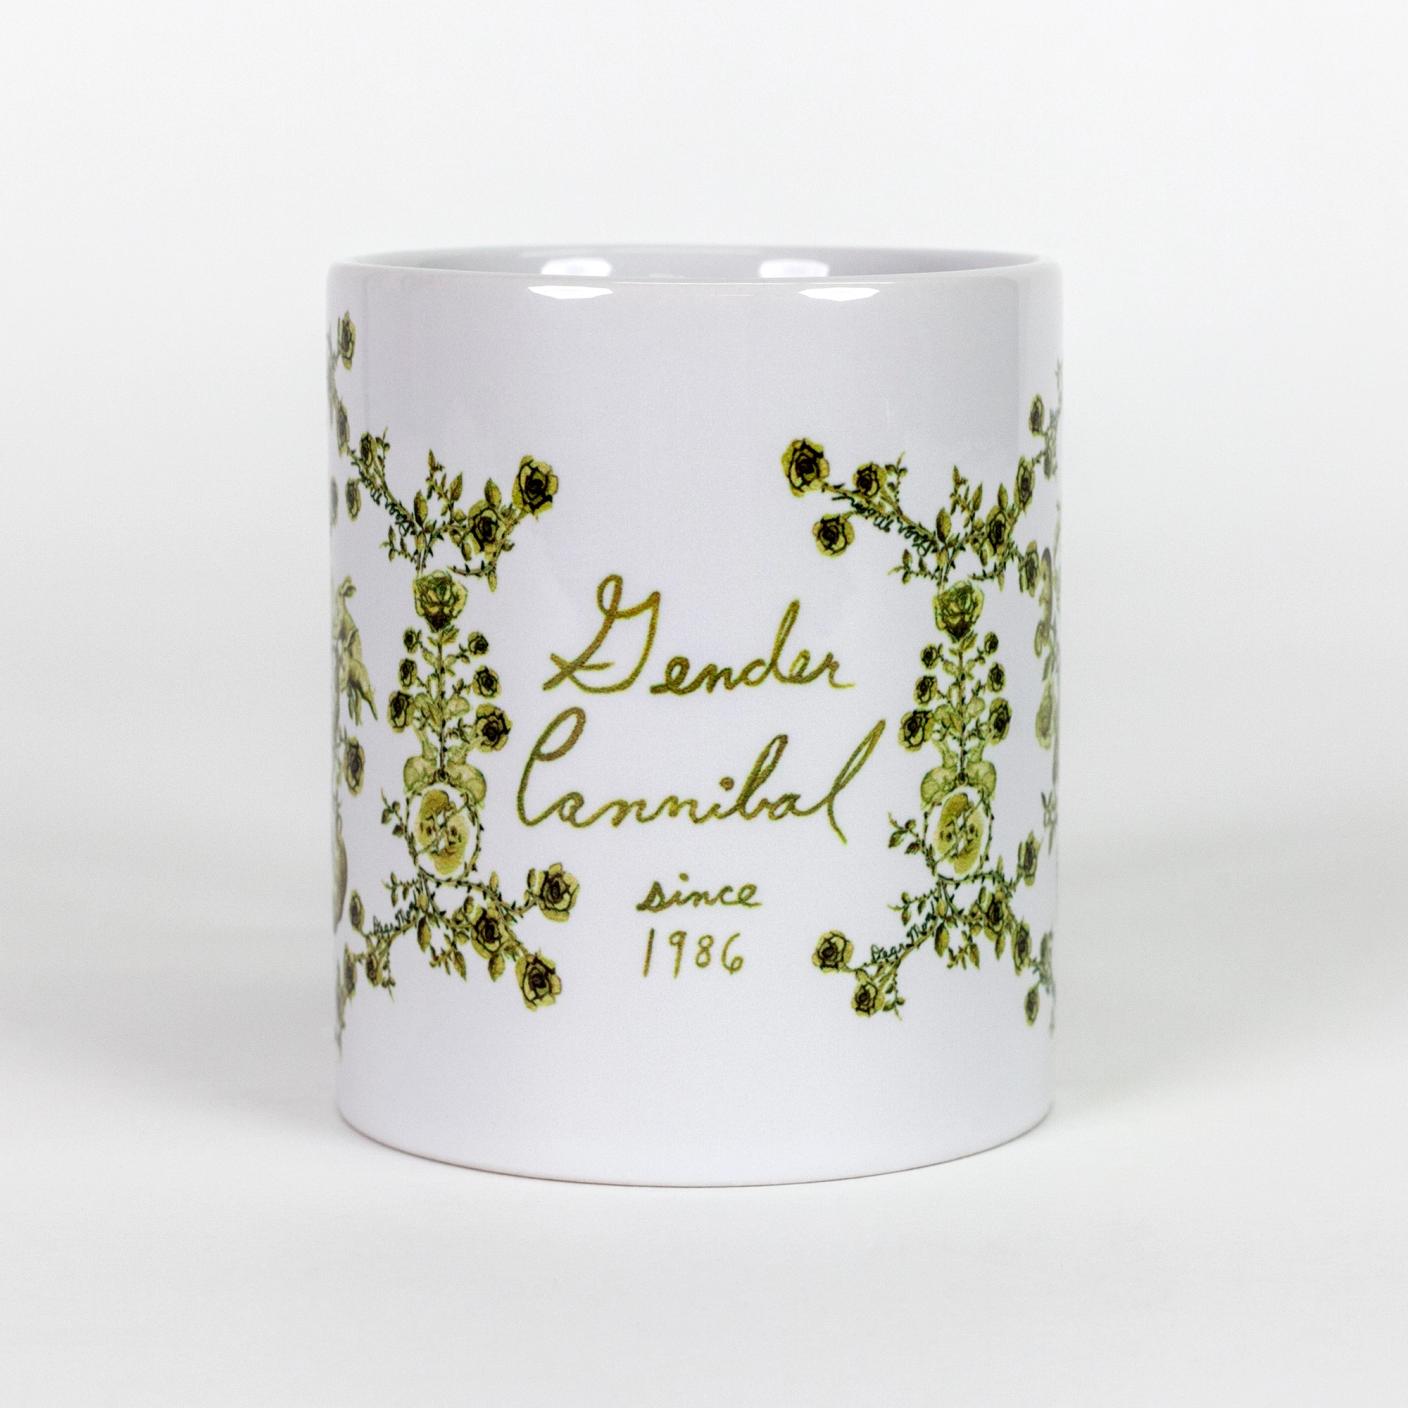 A white ceramic mug with "Gender Cannibal since 1986" written in green, watercolor-like script. Surrounding the text is a hand-illustrated green toile-like pattern made up mostly of roses but also features twin fetuses and rabbits.